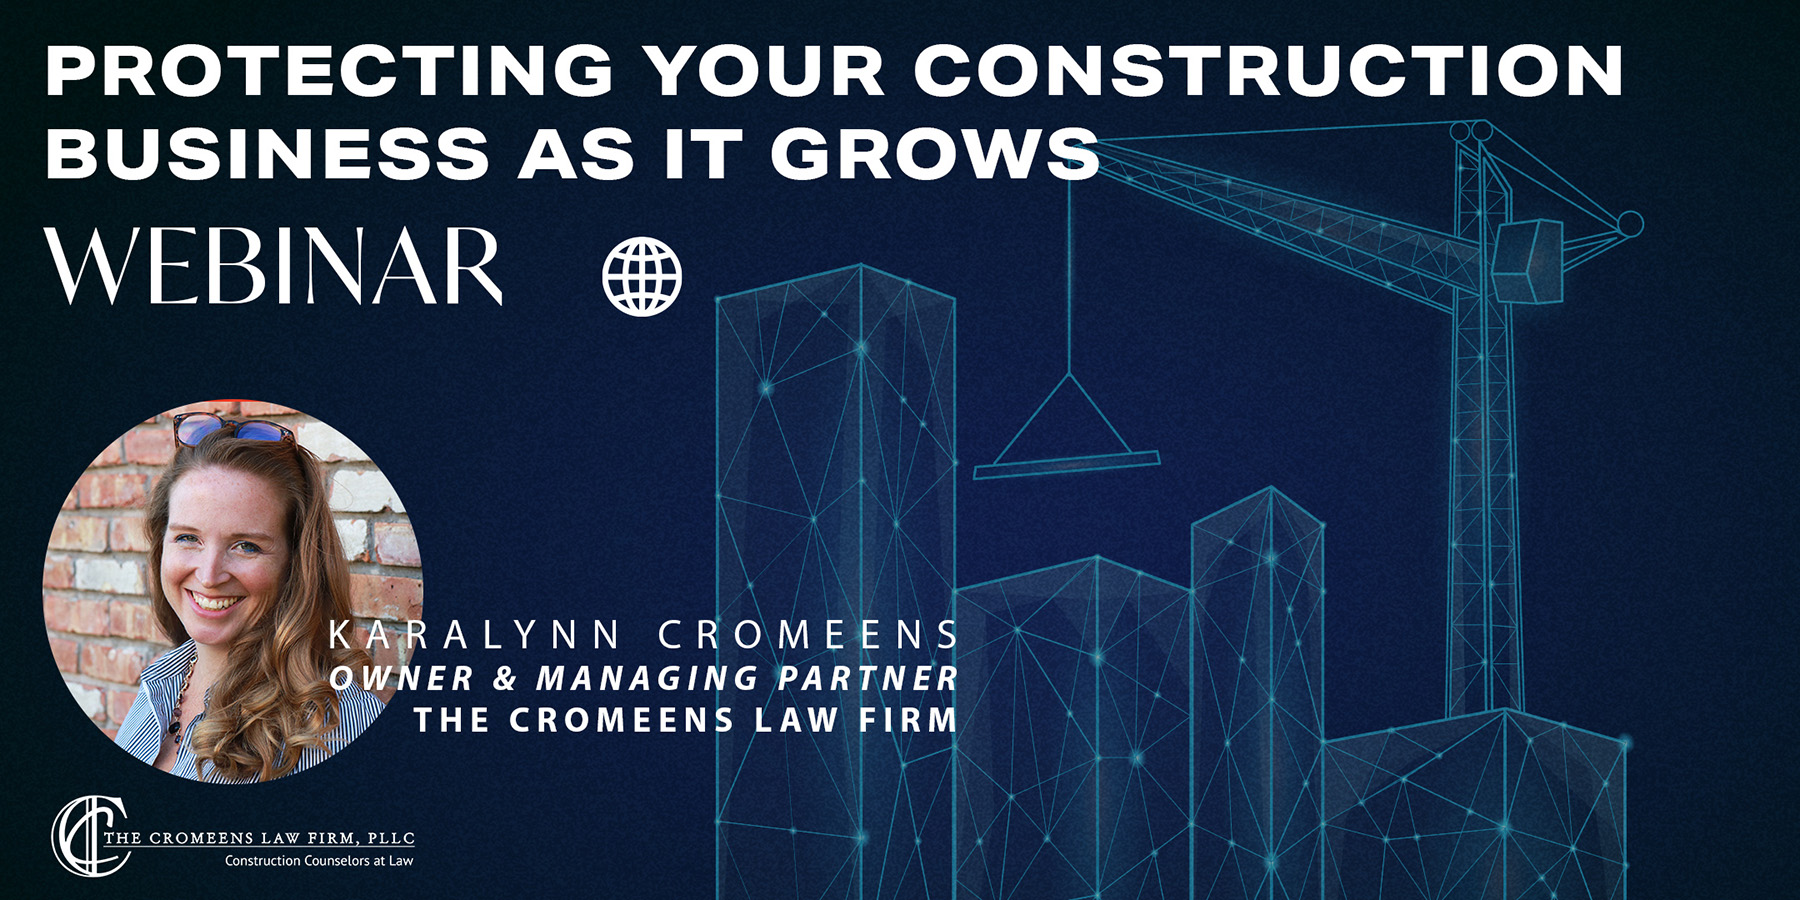 Protecting Your Construction Business as it Grows Webinar. – July 28